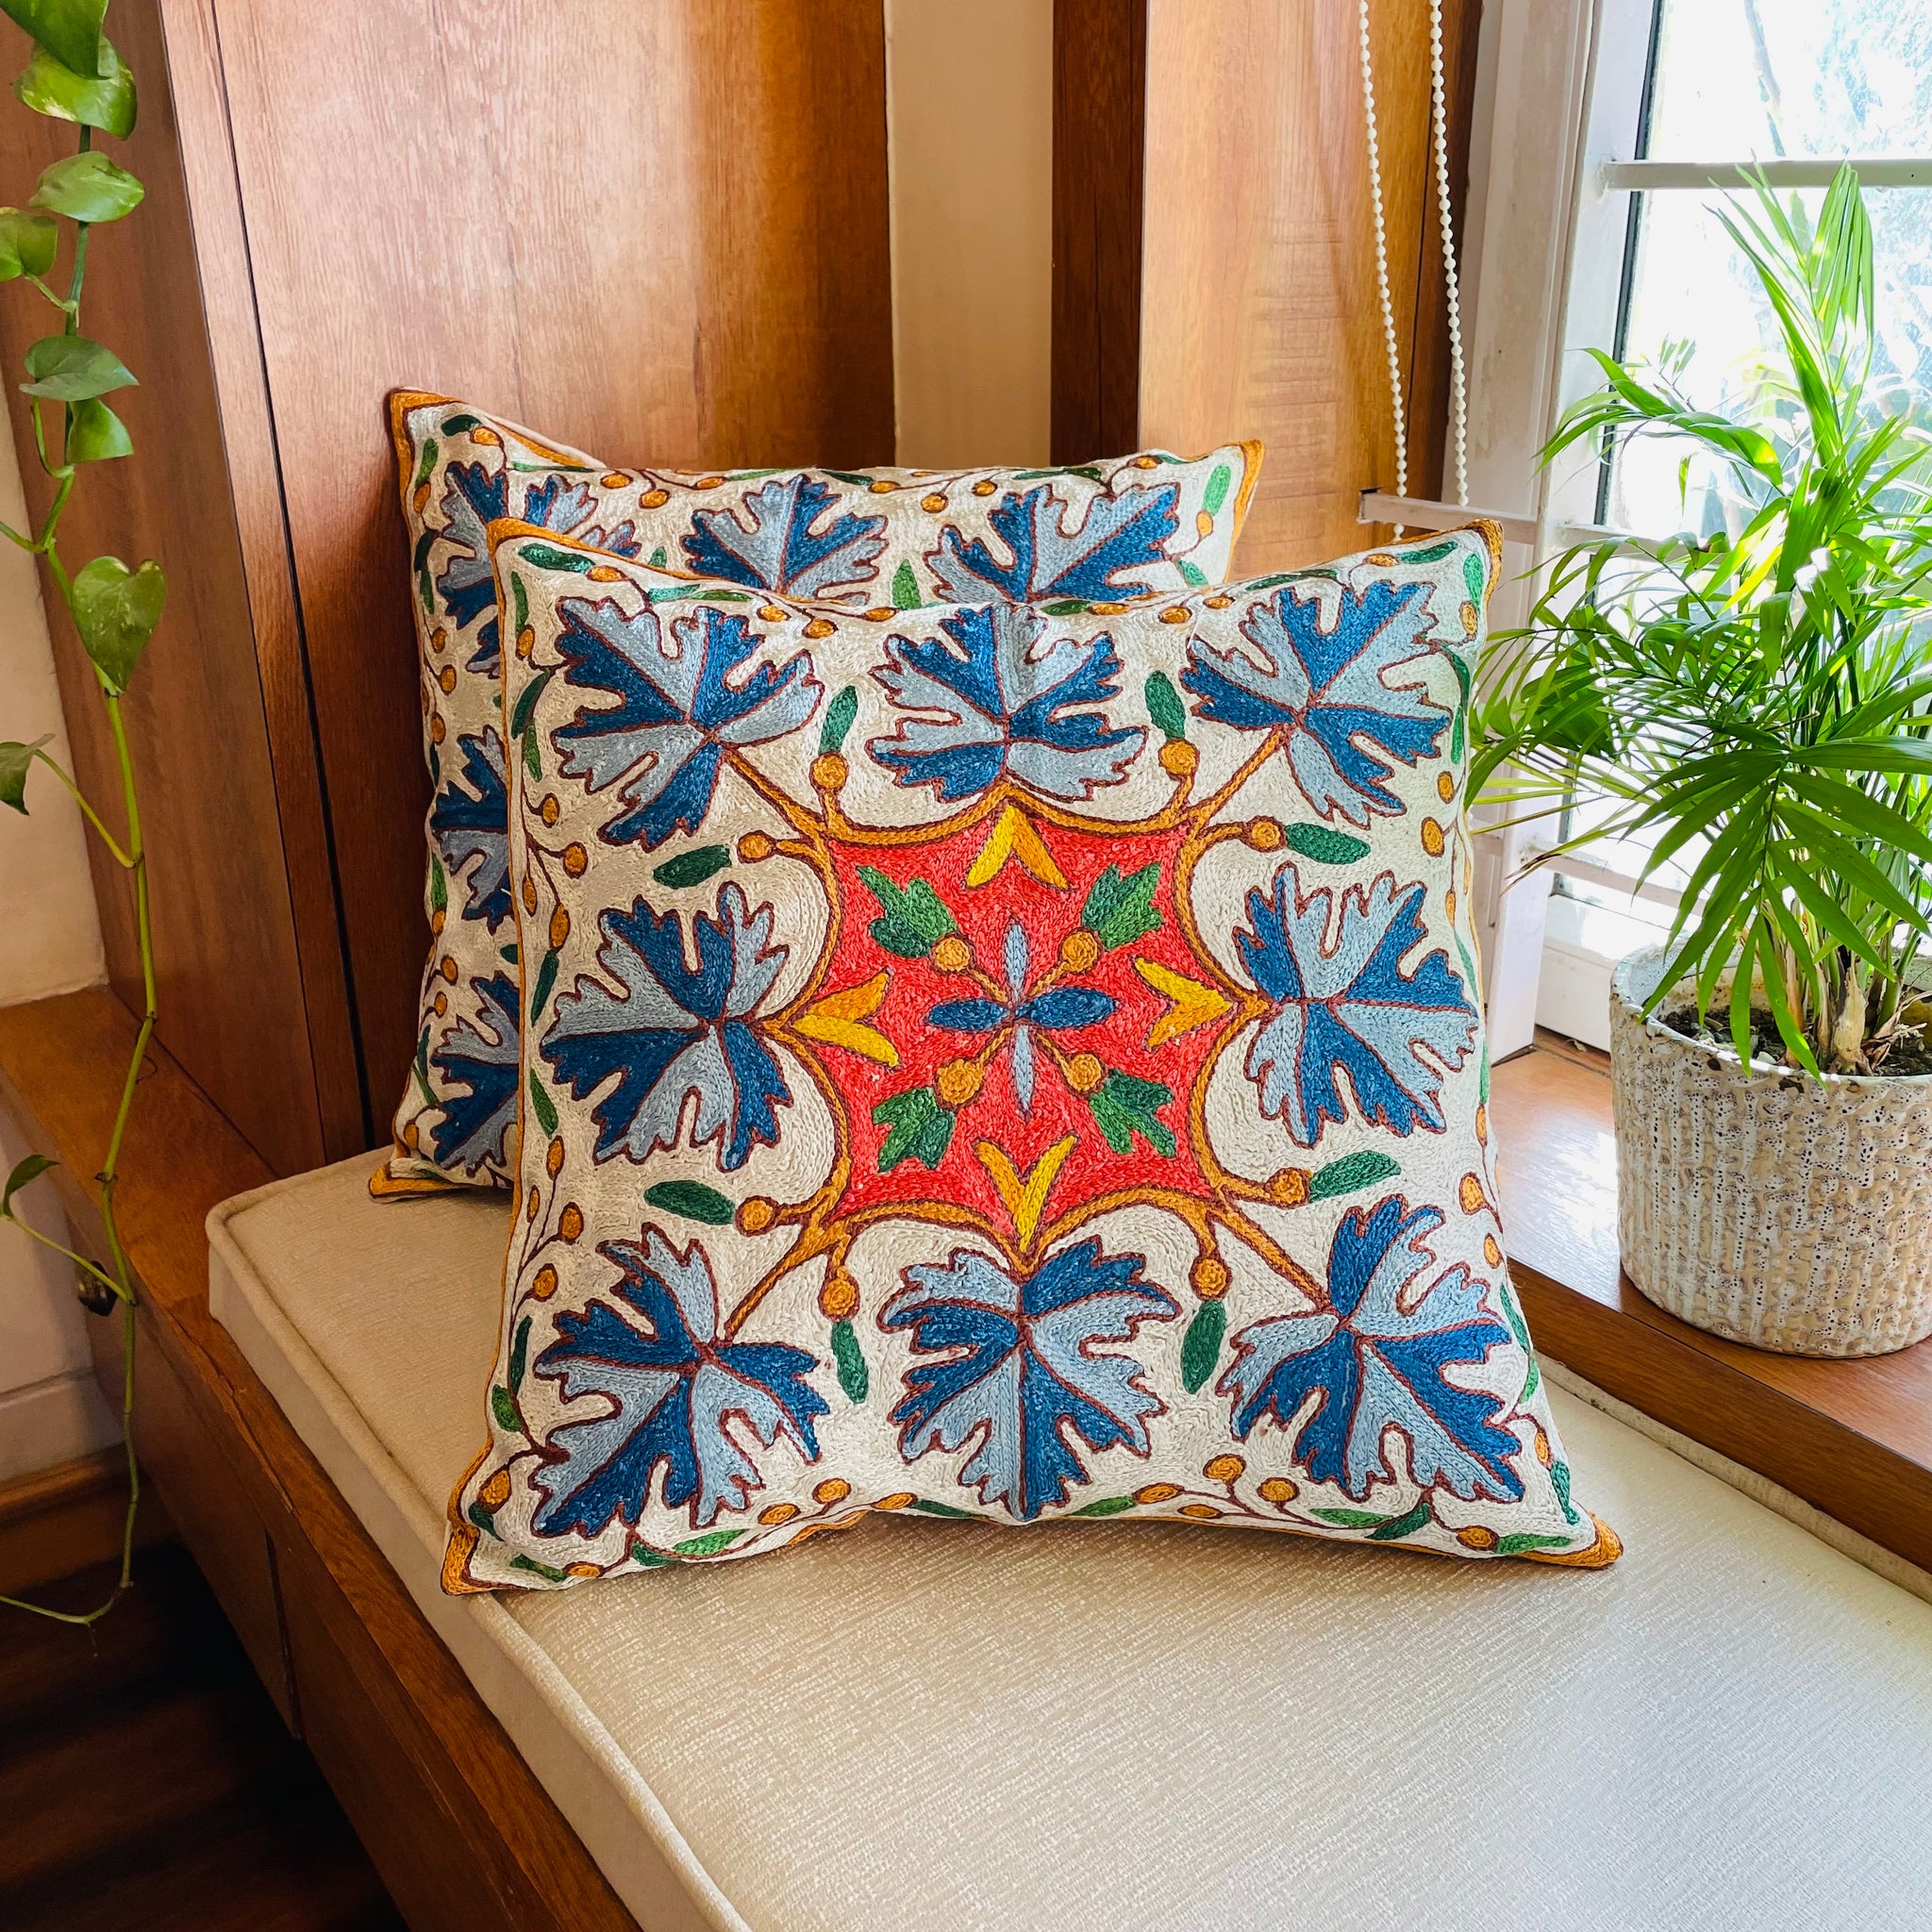 Maple Leaf Chainstitch Embroidered Cushion Cover - Blue and Orange